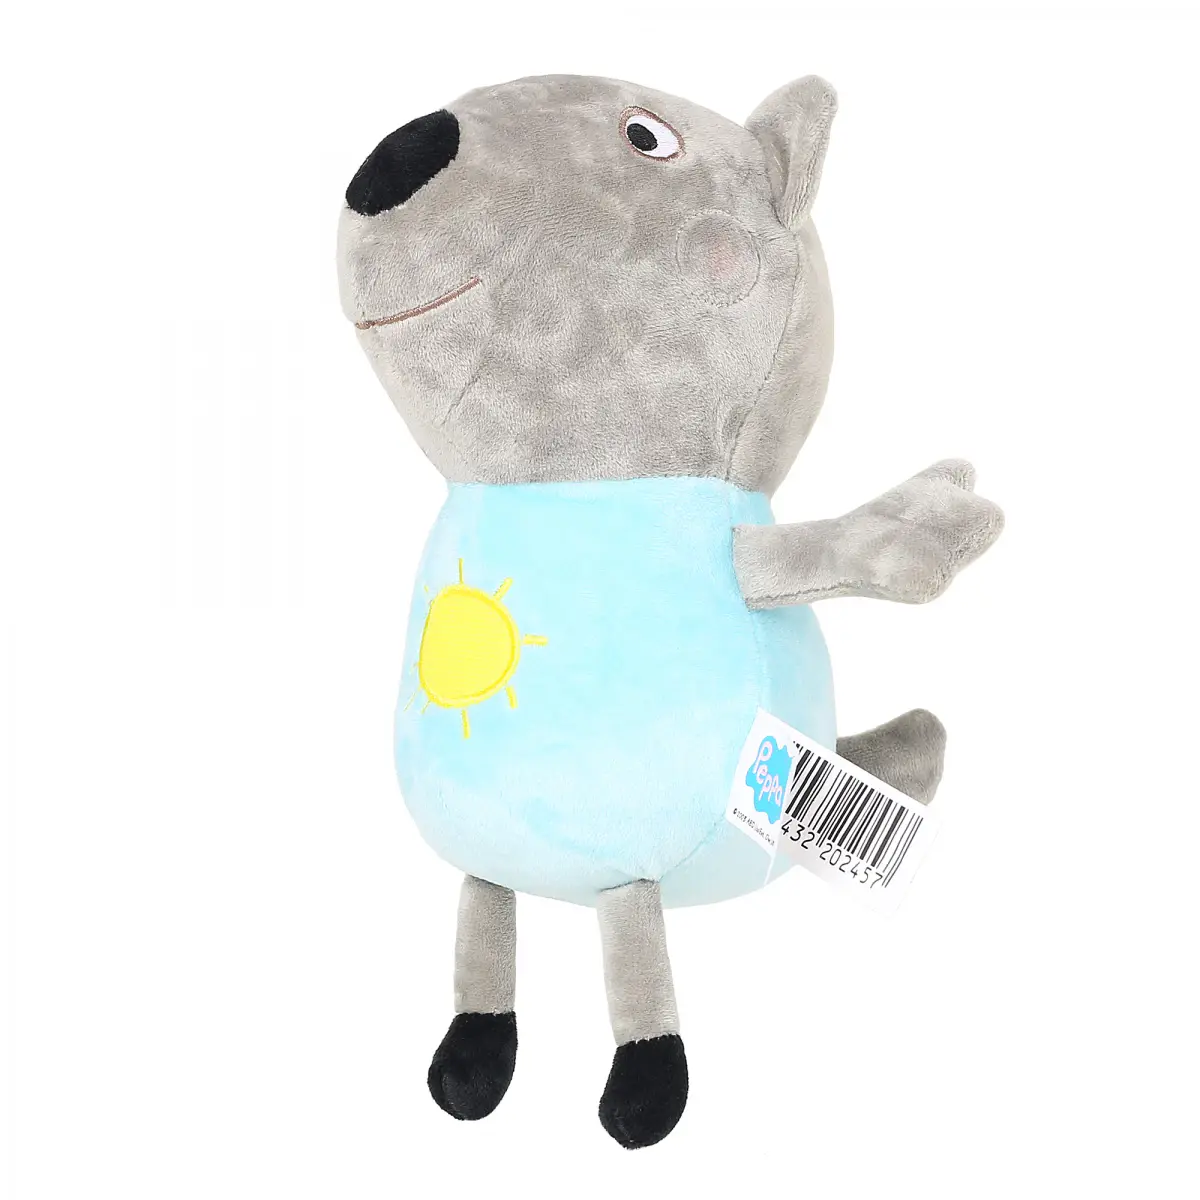 Peppa Pig Danny Dog Soft Toy for Kids, 30cm, 18M+, Multicolour